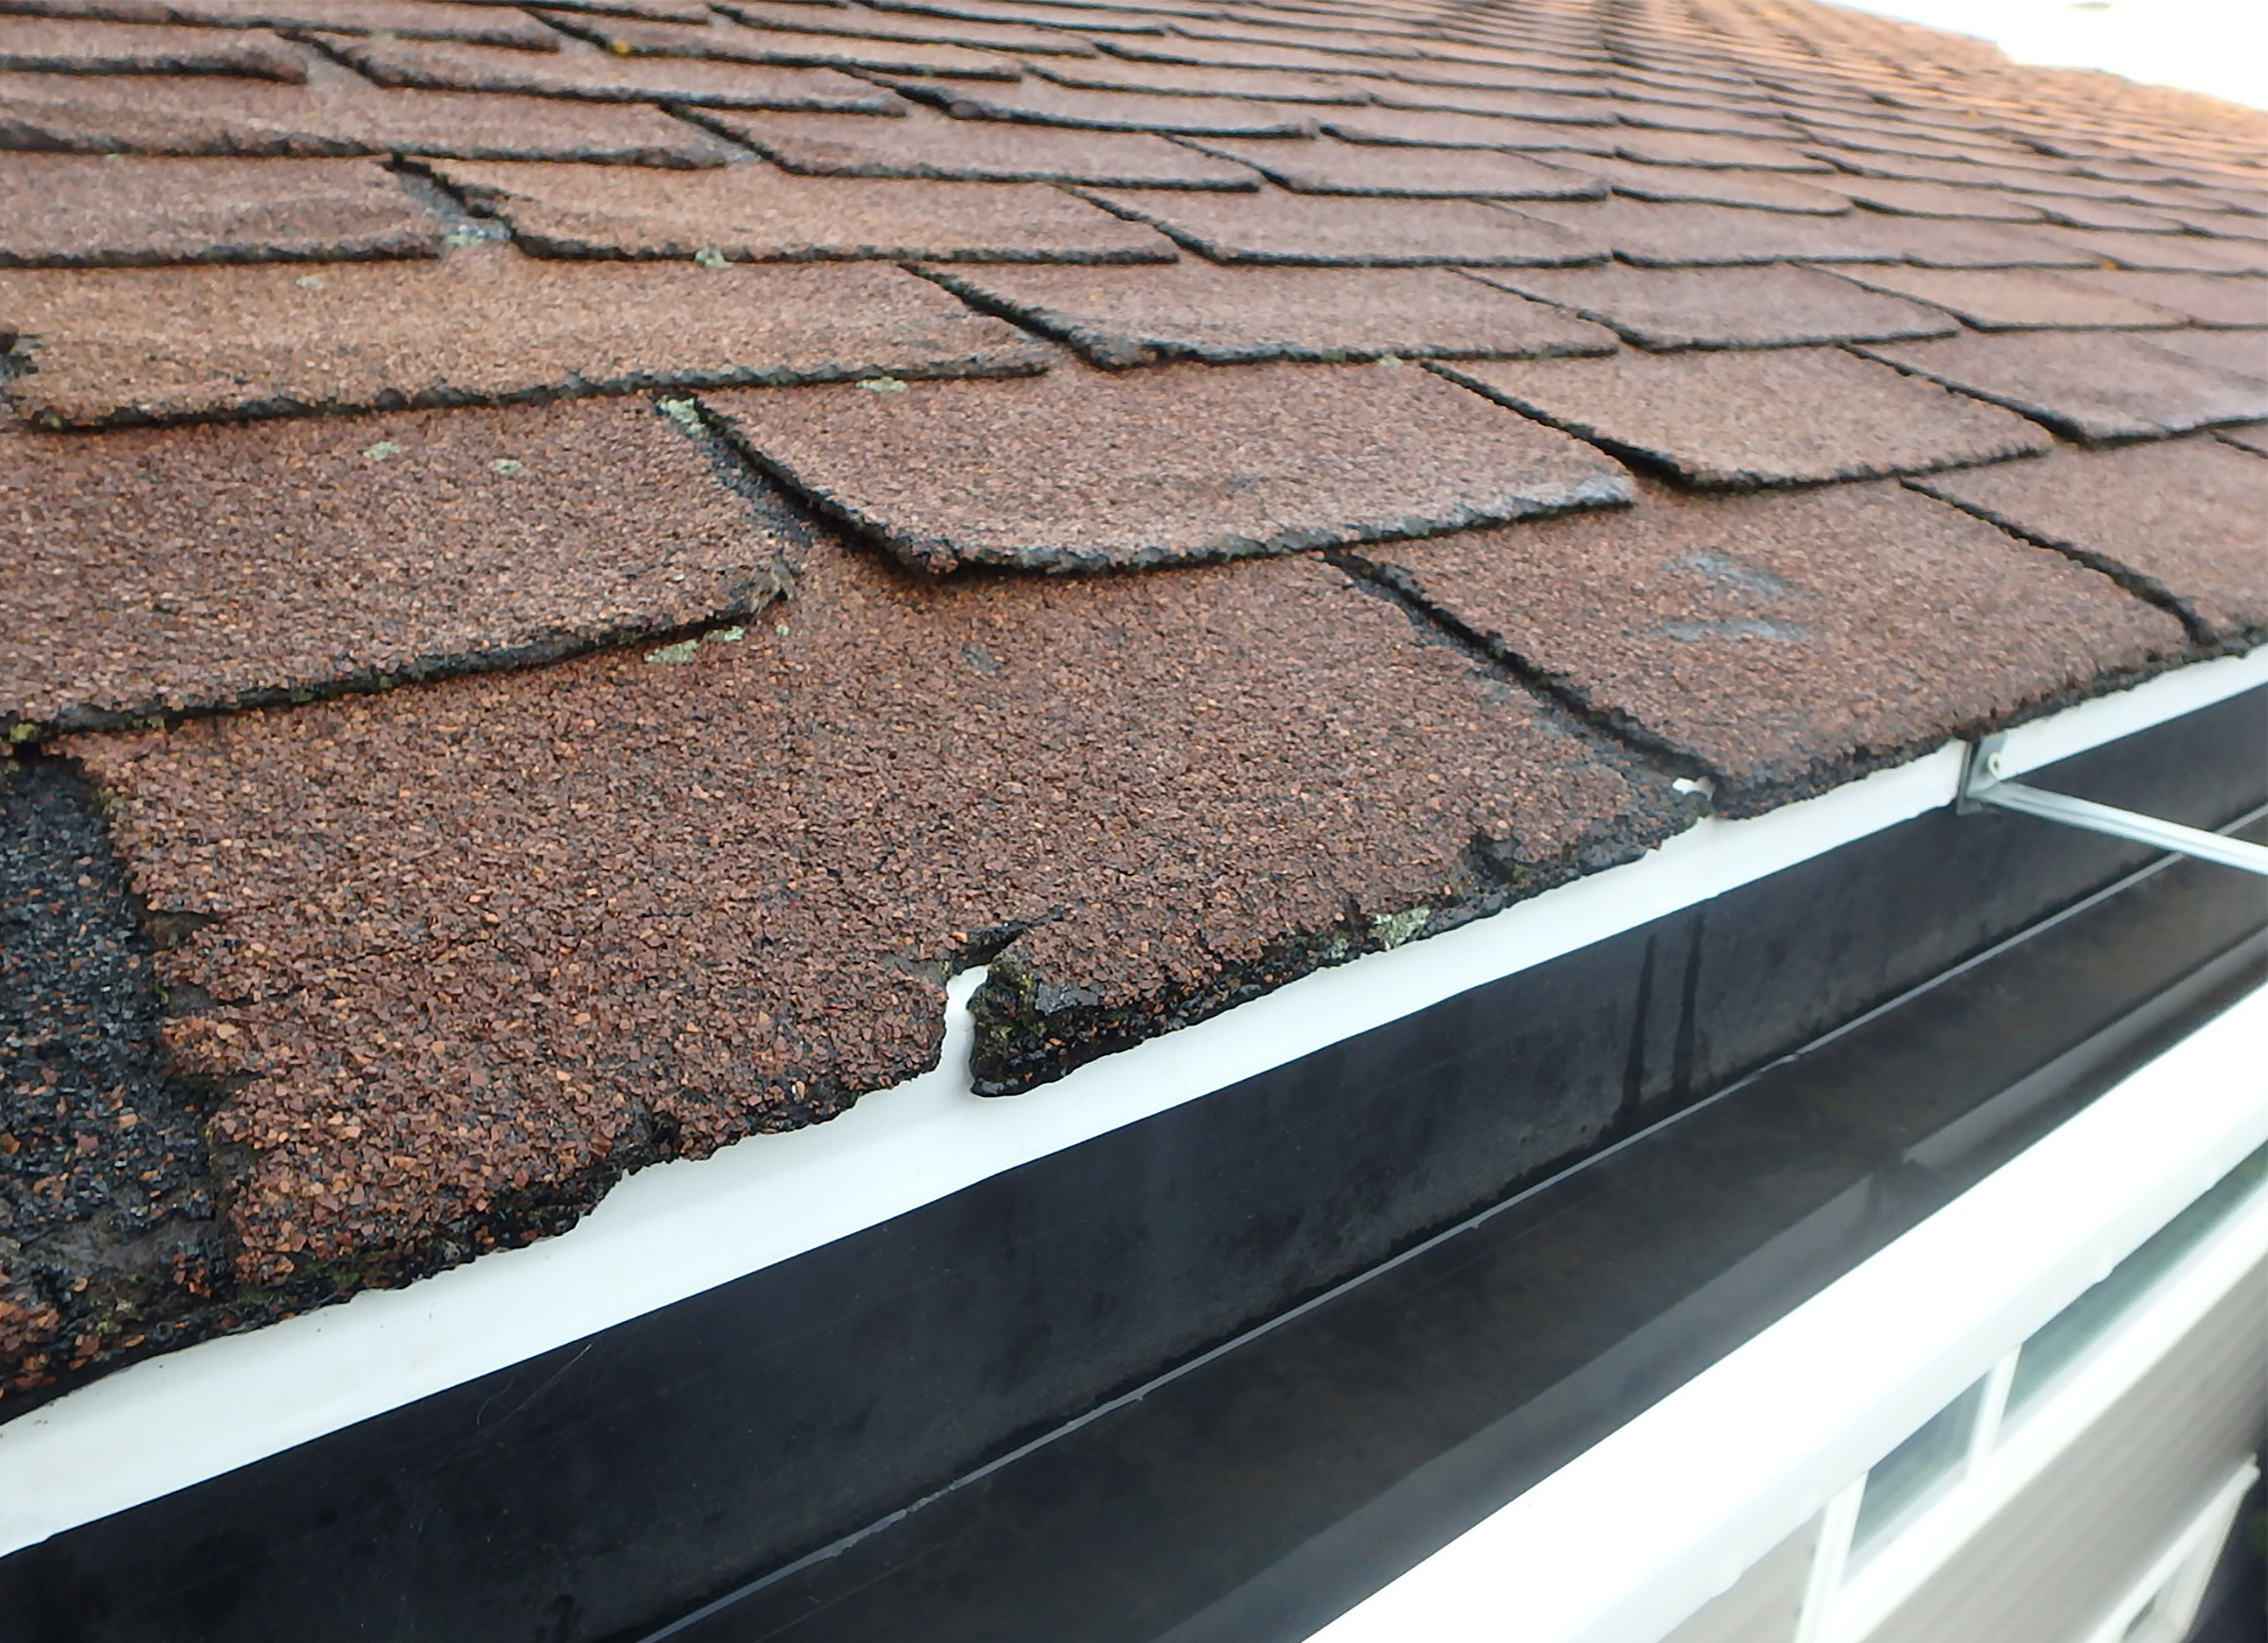 Roof damage caused by hail is common in Florida